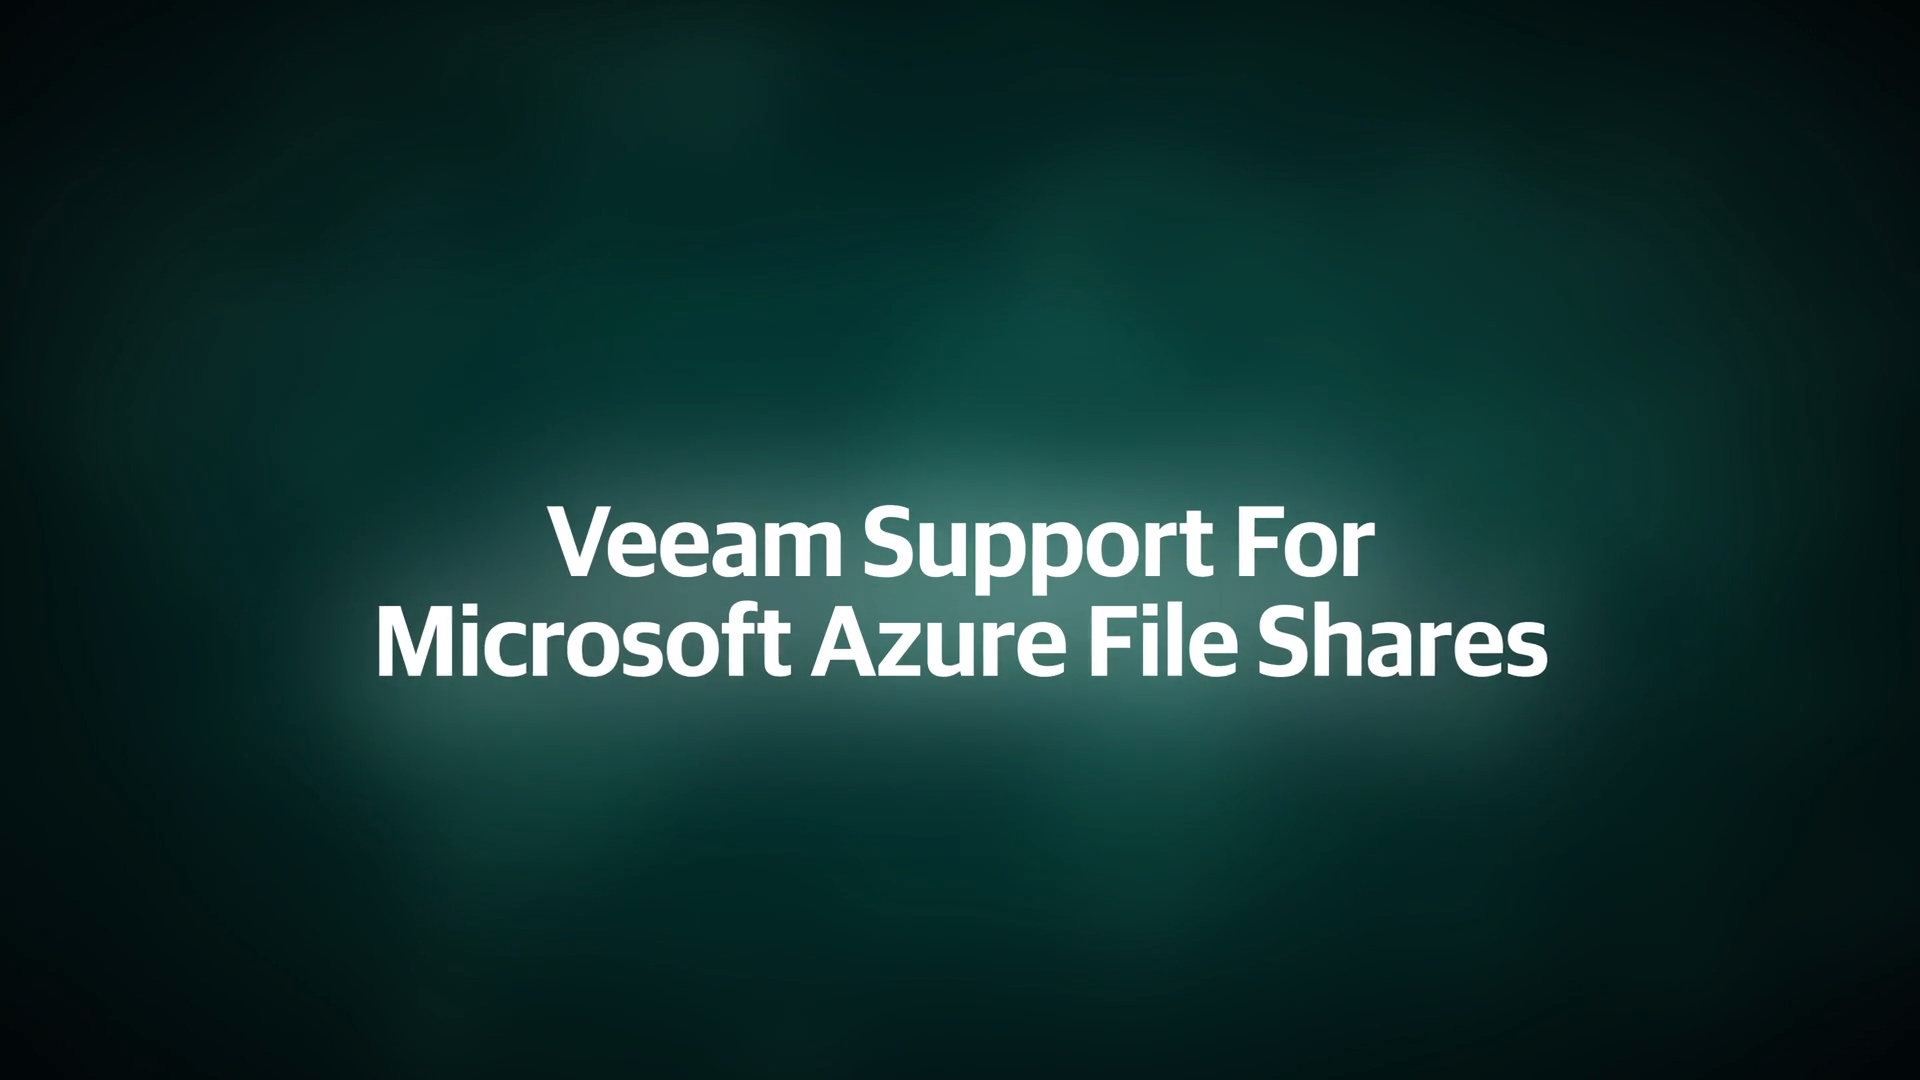 Veeam Support for Microsoft Azure File Shares